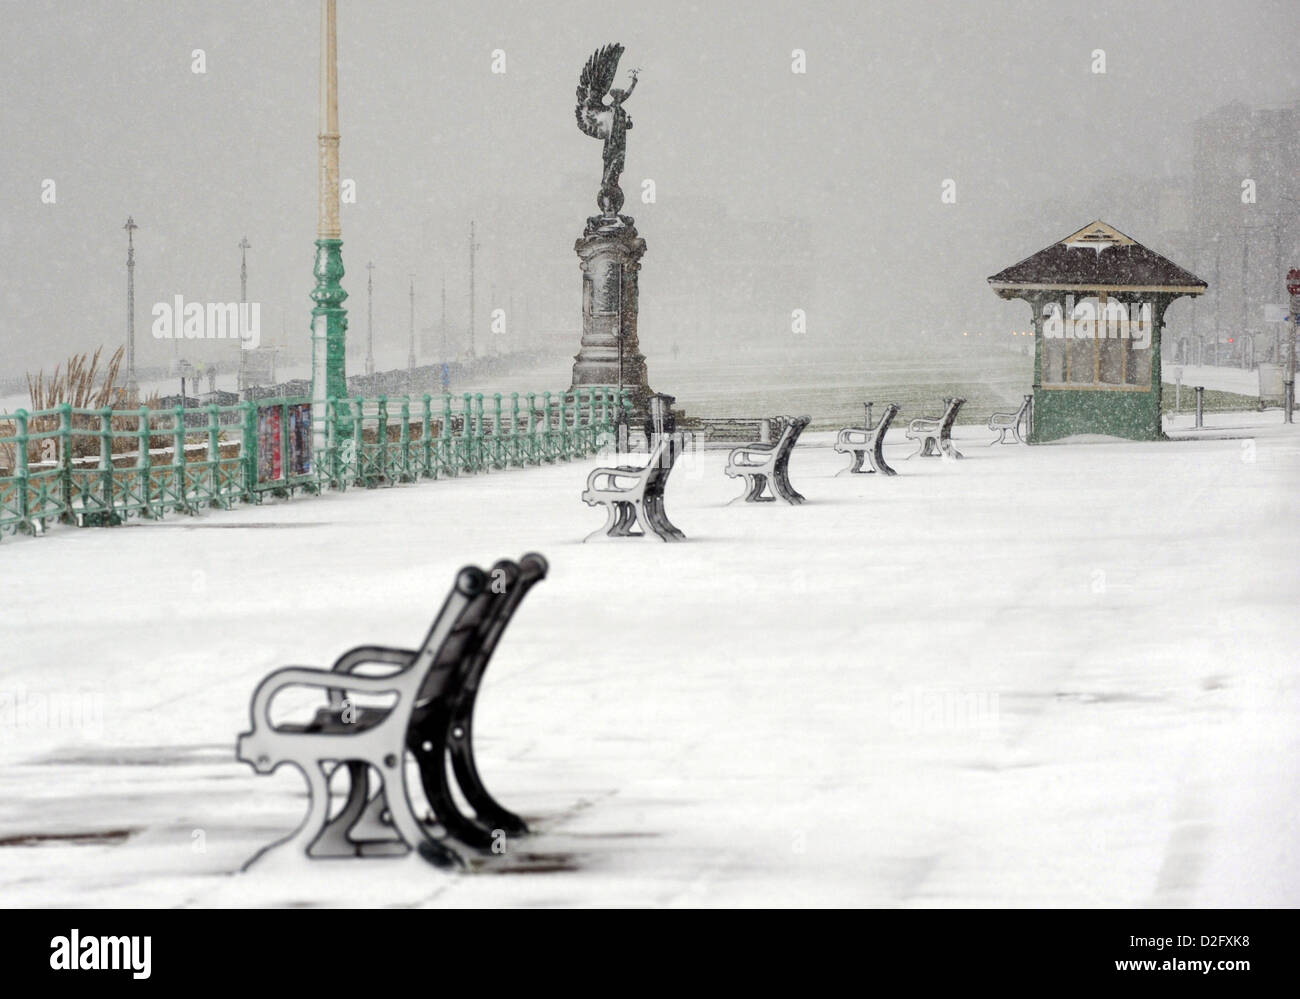 Snow and high winds cause blizzard conditions on Brighton seafront leaving it deserted Stock Photo